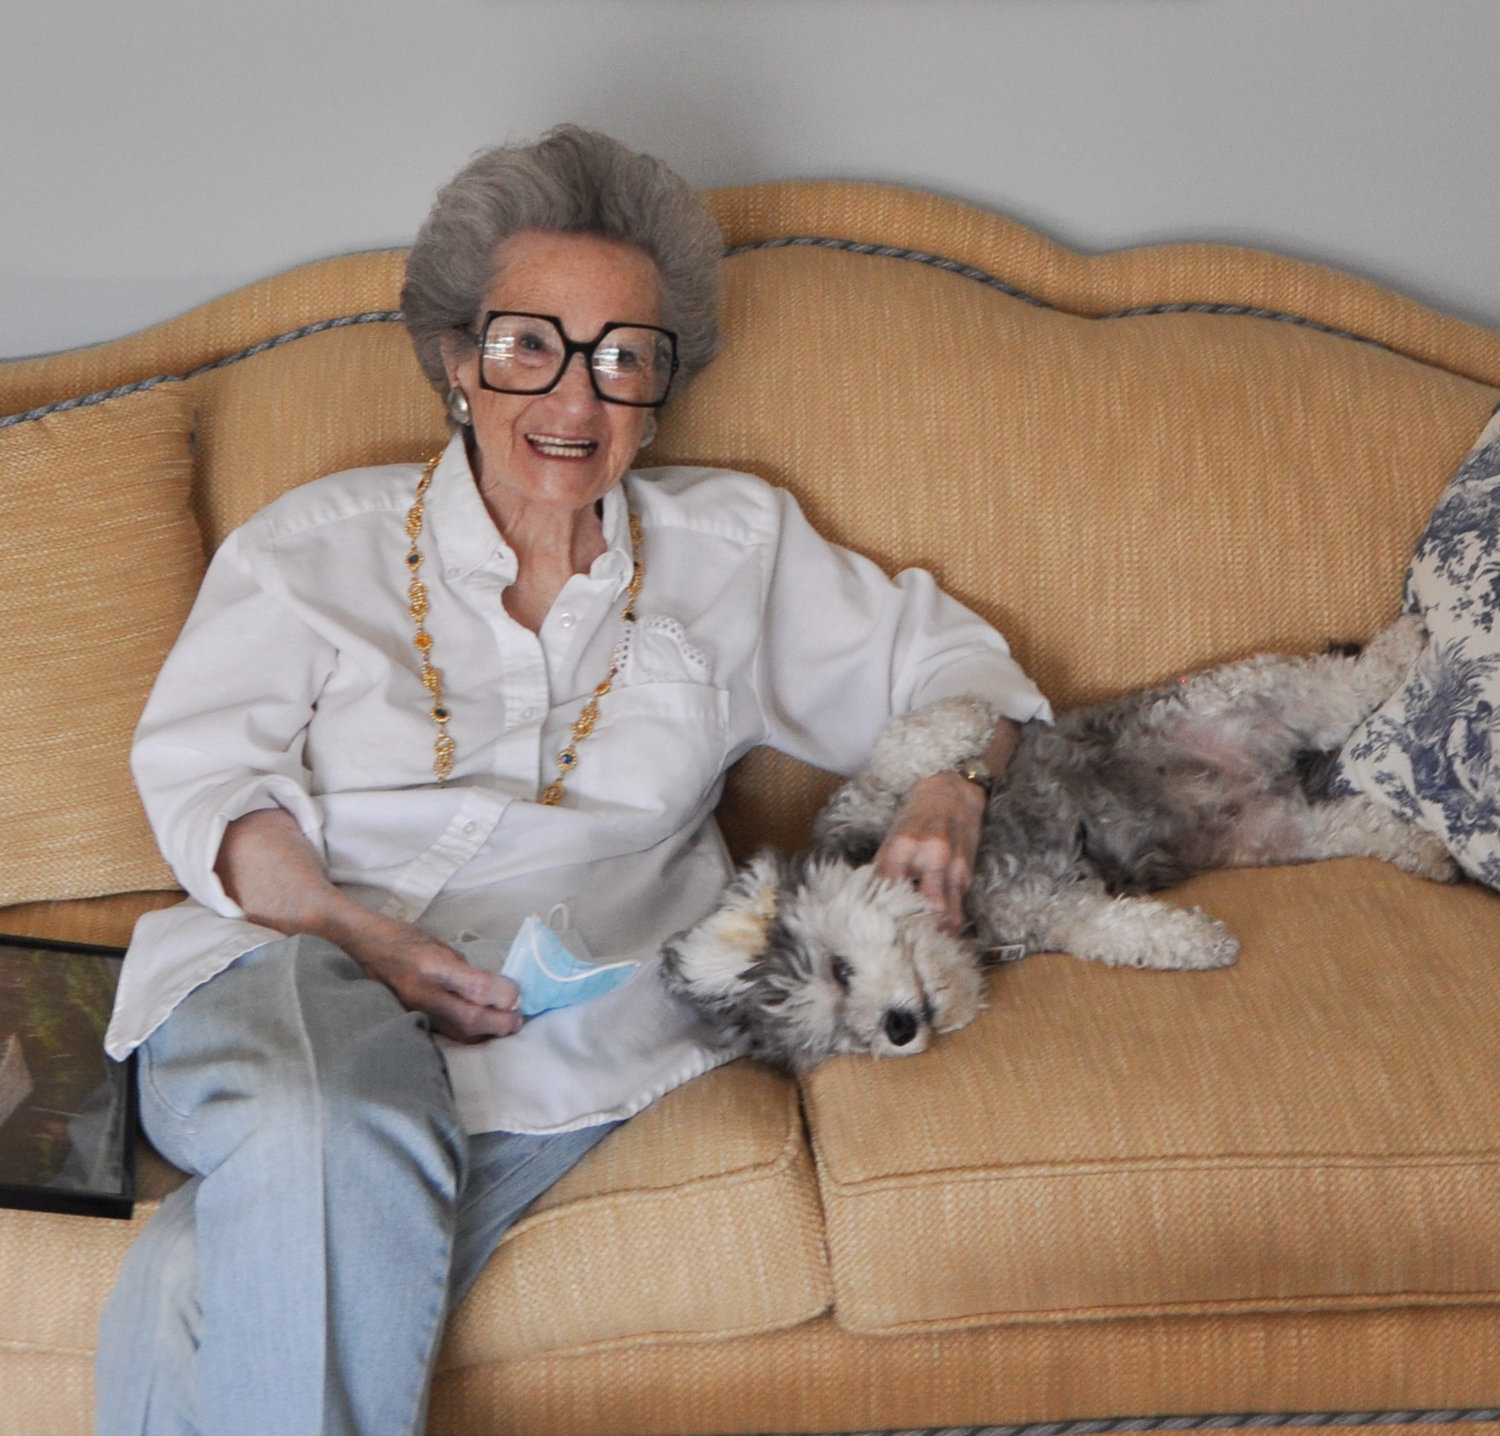 “You look amazing!” I gushed to Aunt Marcia (1928-2022), who cooed excitedly over Dharma the Wonder Dog first (of course), then me.